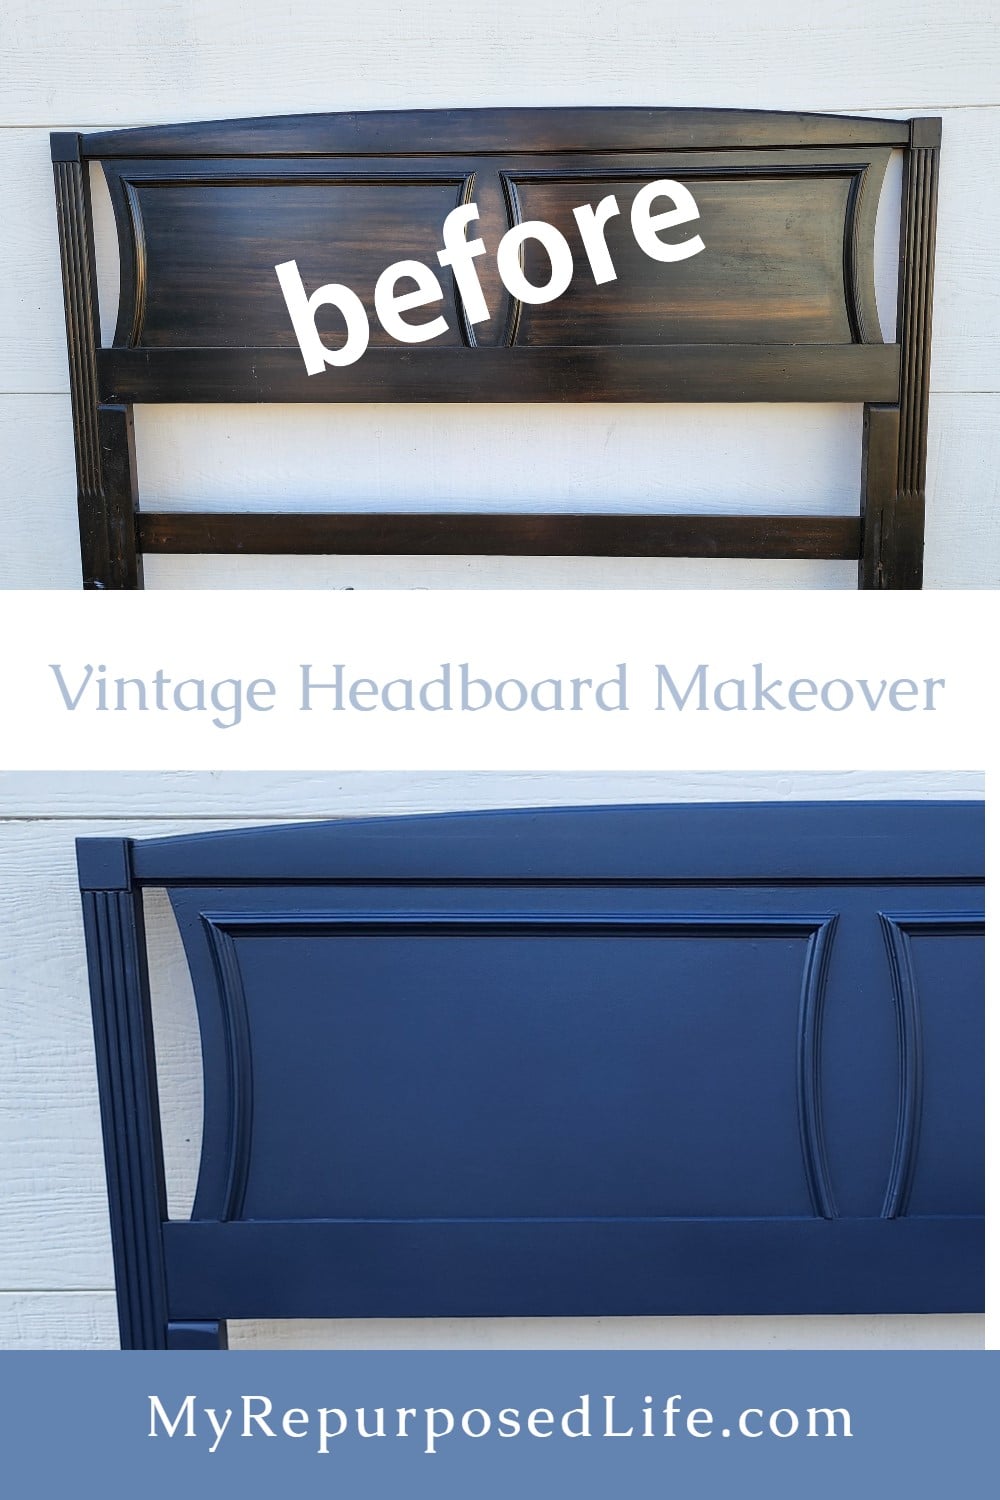 Not all projects go as planned. This is the case of the Vintage Headboard Makeover. Tips for cleaning and painting successfully. via @repurposedlife